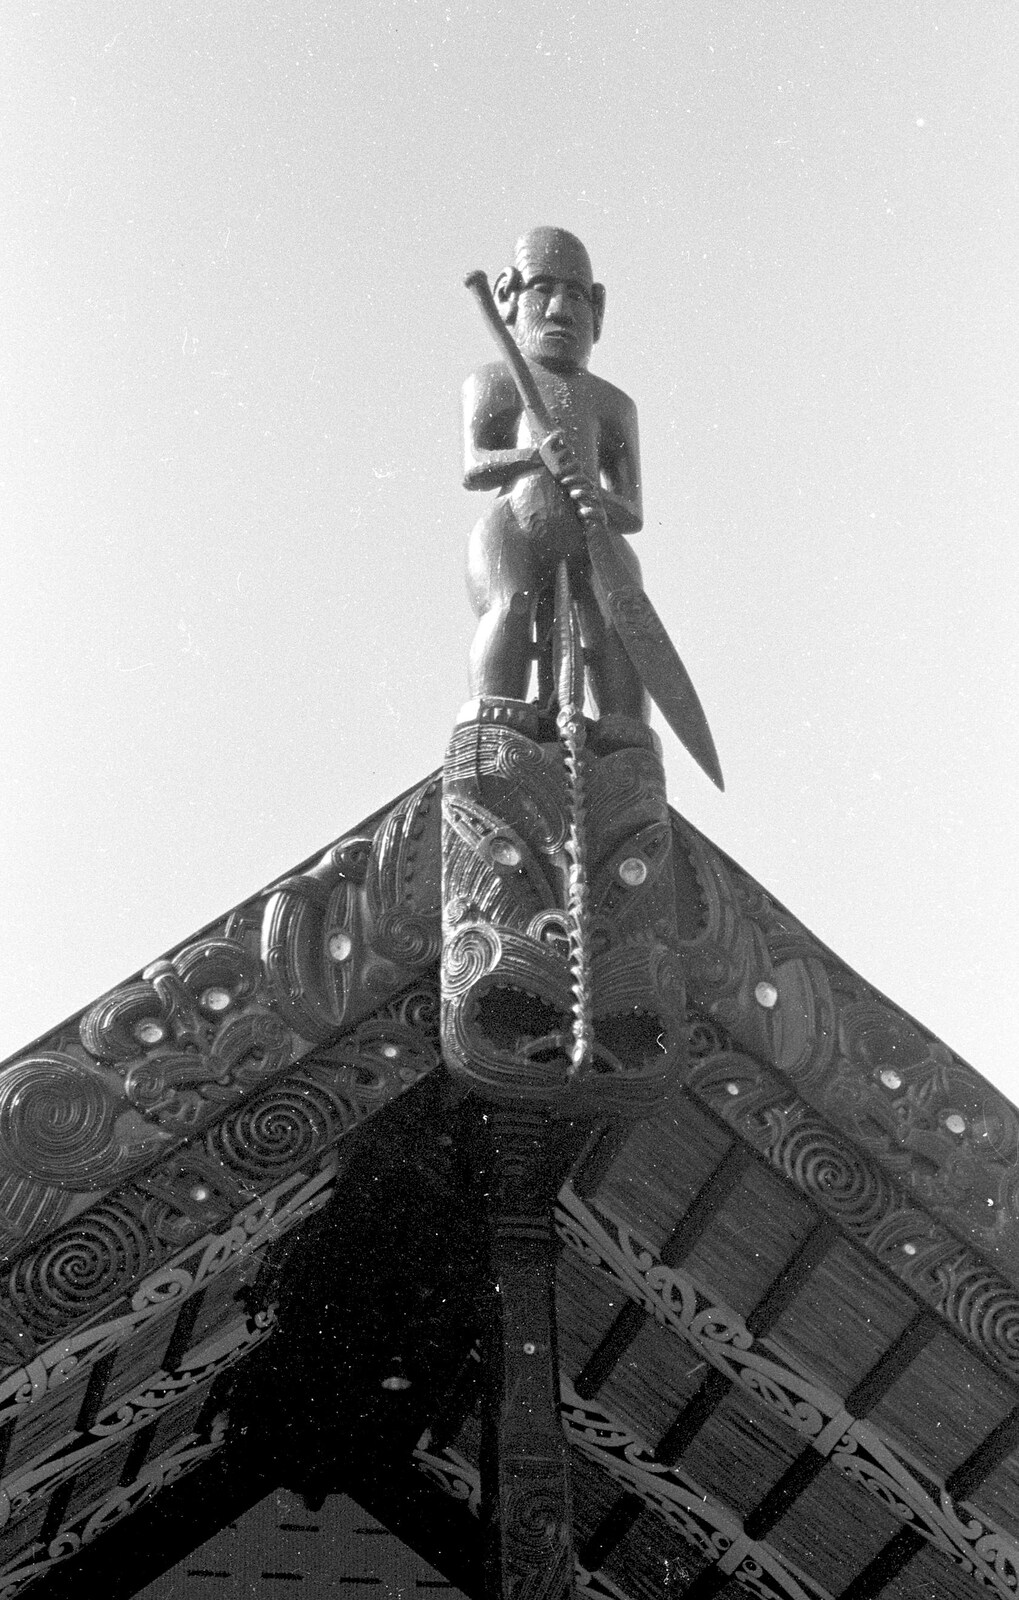 A carved Maori warrior protects a wharenui from A Road-trip Through Rotorua to Palmerston, North Island, New Zealand - 27th November 1992